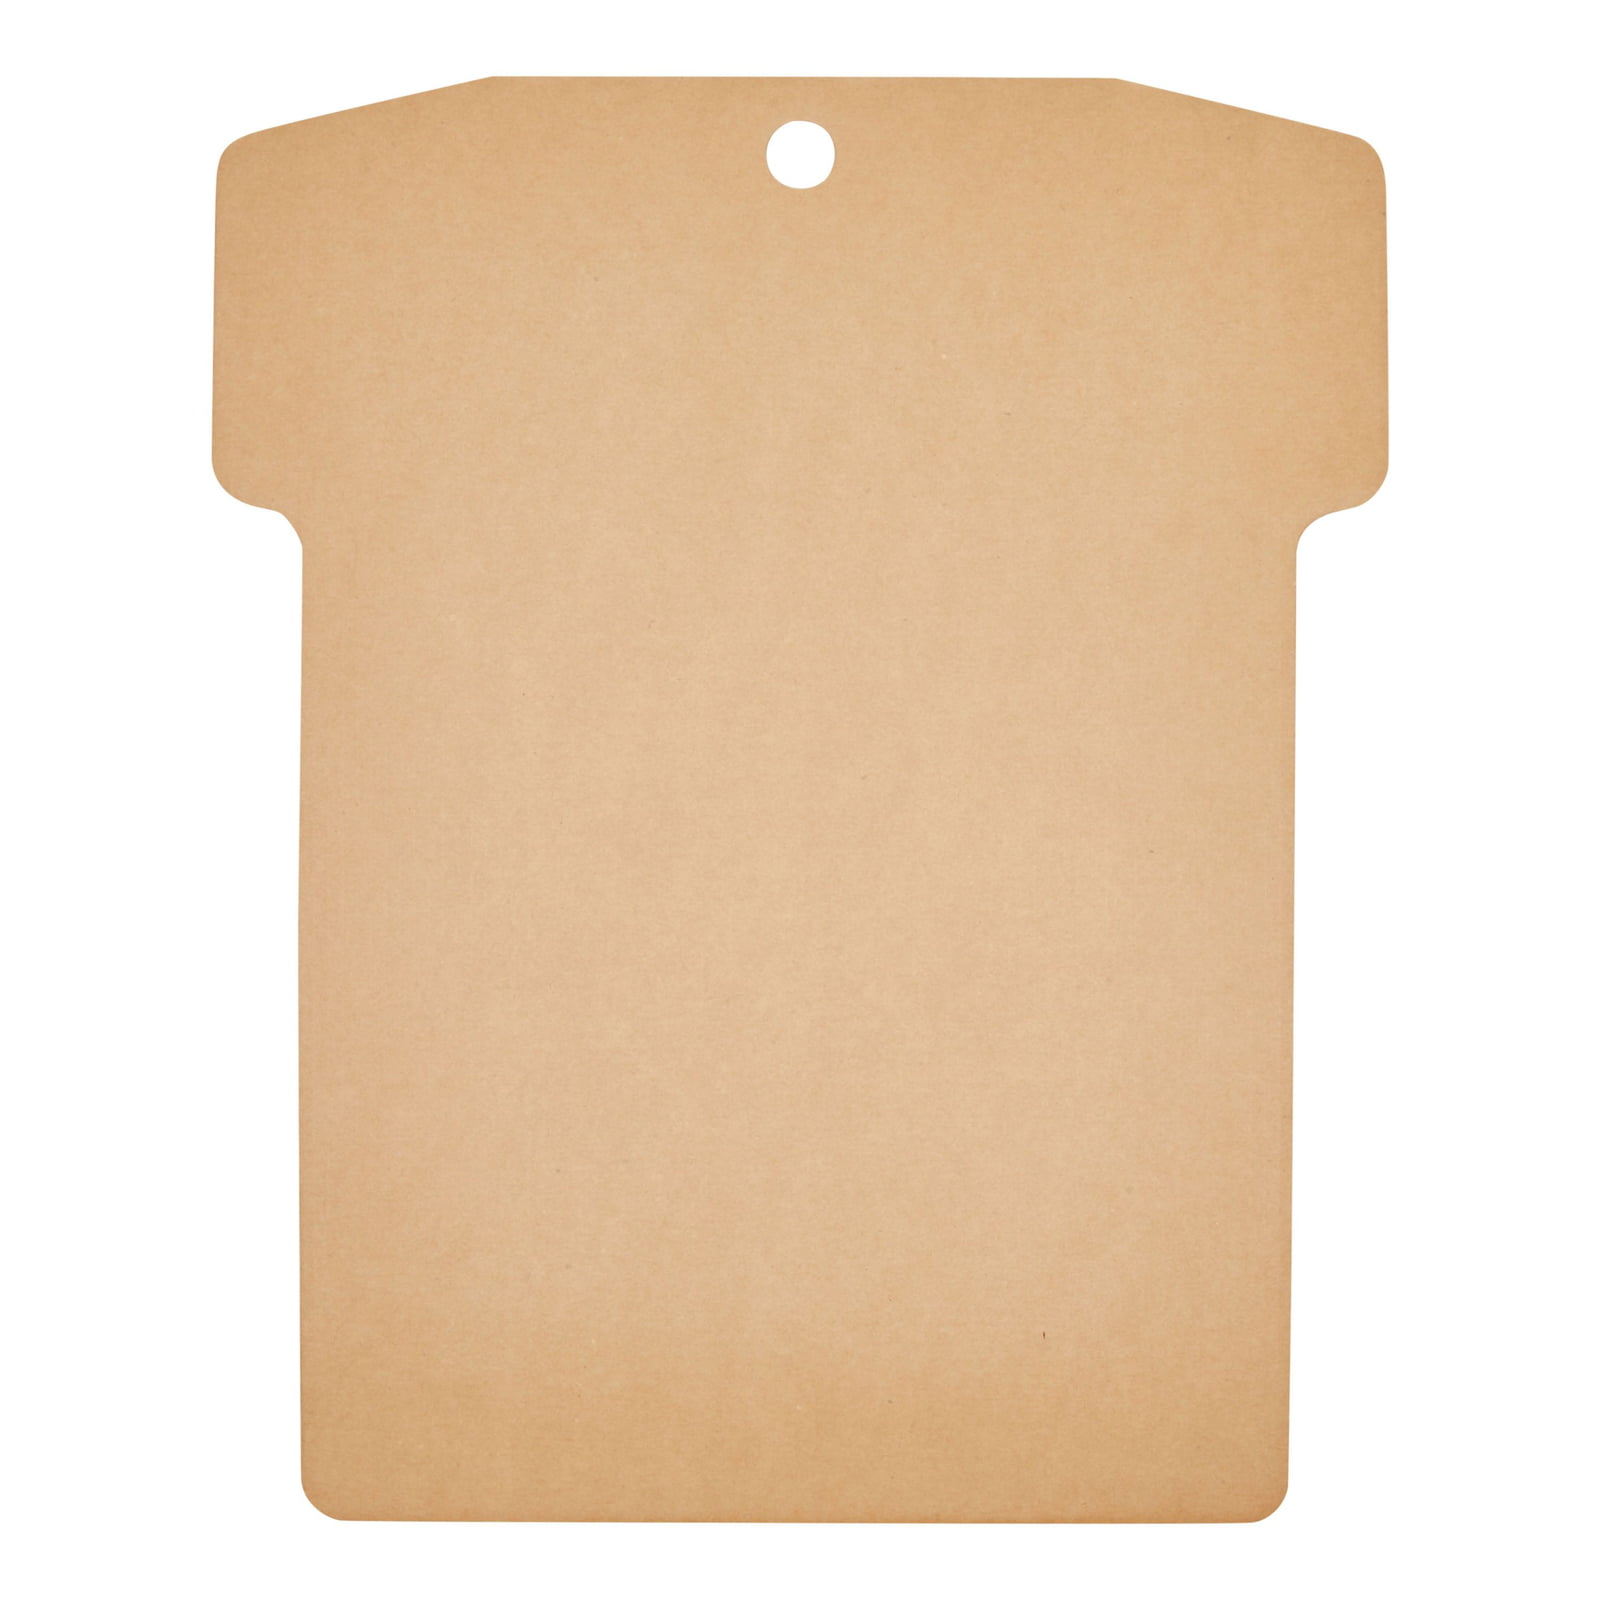 17 x 26 in, 24 Pack Size Large Youth Cardboard Shirt Form for Arts and Crafts 